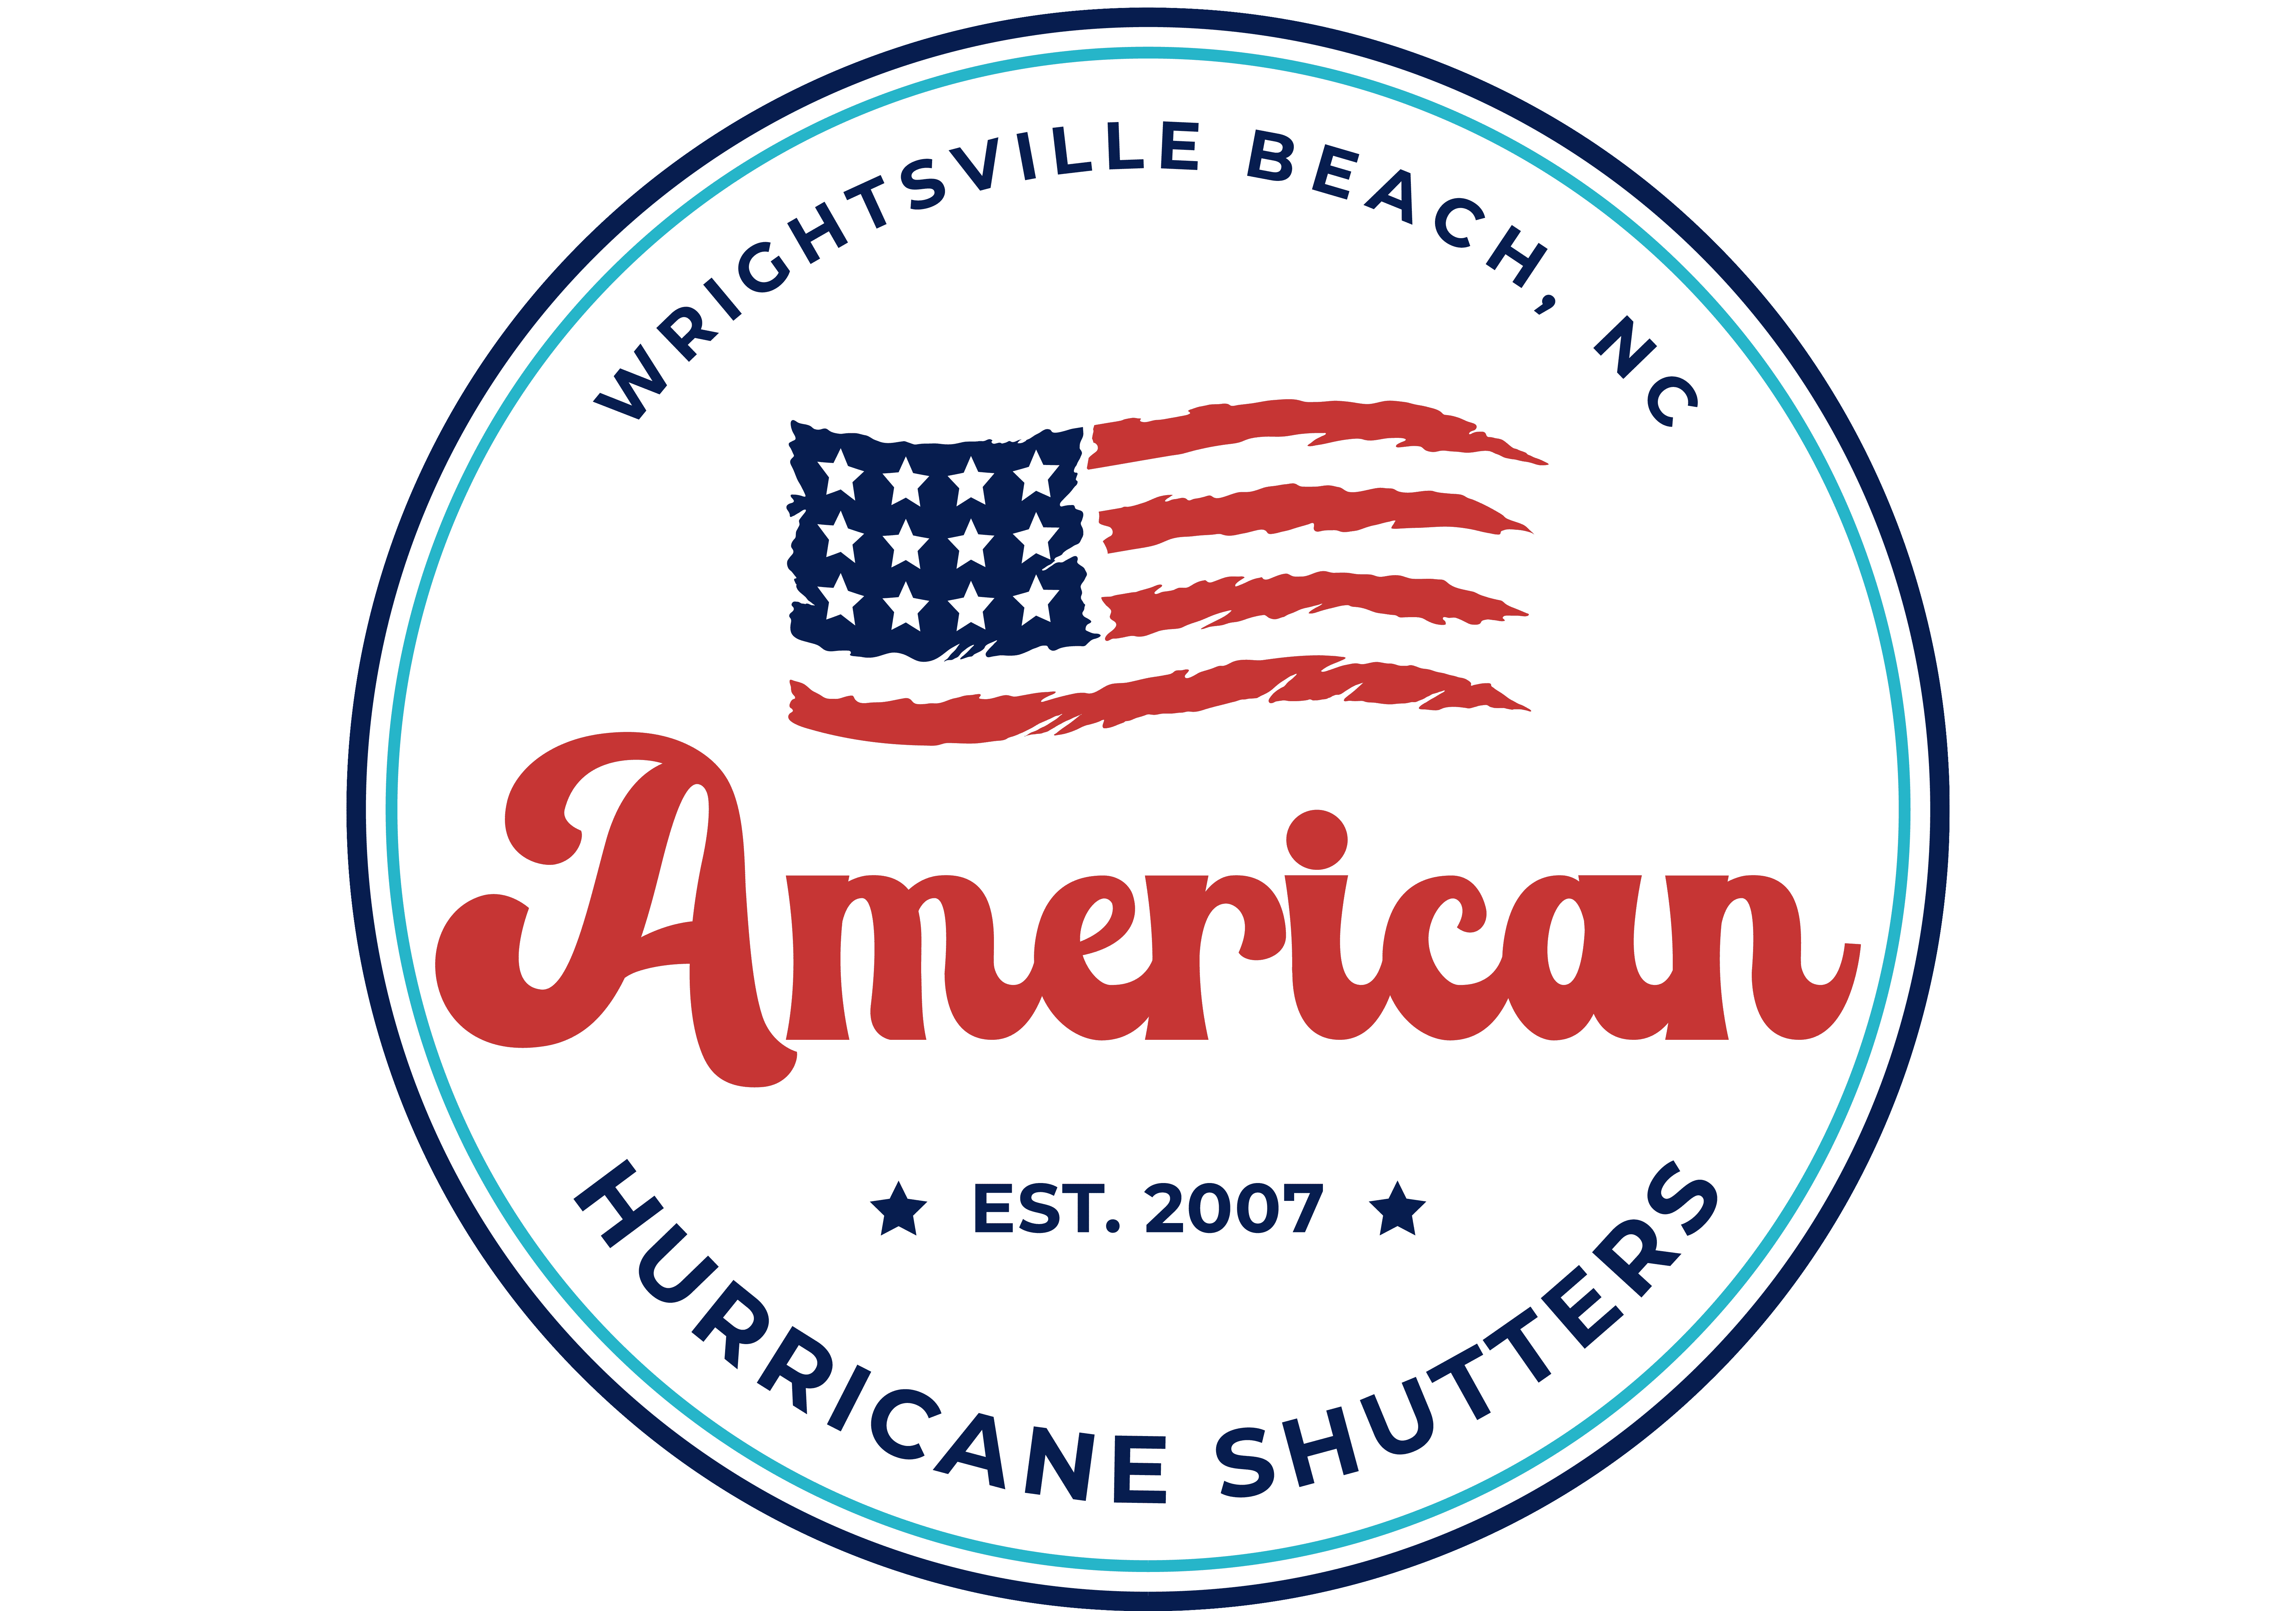 Logo of American Hurricane Shutters with an American flag motif above the name. Text reads "Wrightsville Beach, NC," "American," and "EST. 2007." Background is green and features the keyword "Carolina. in either North or South Carolina